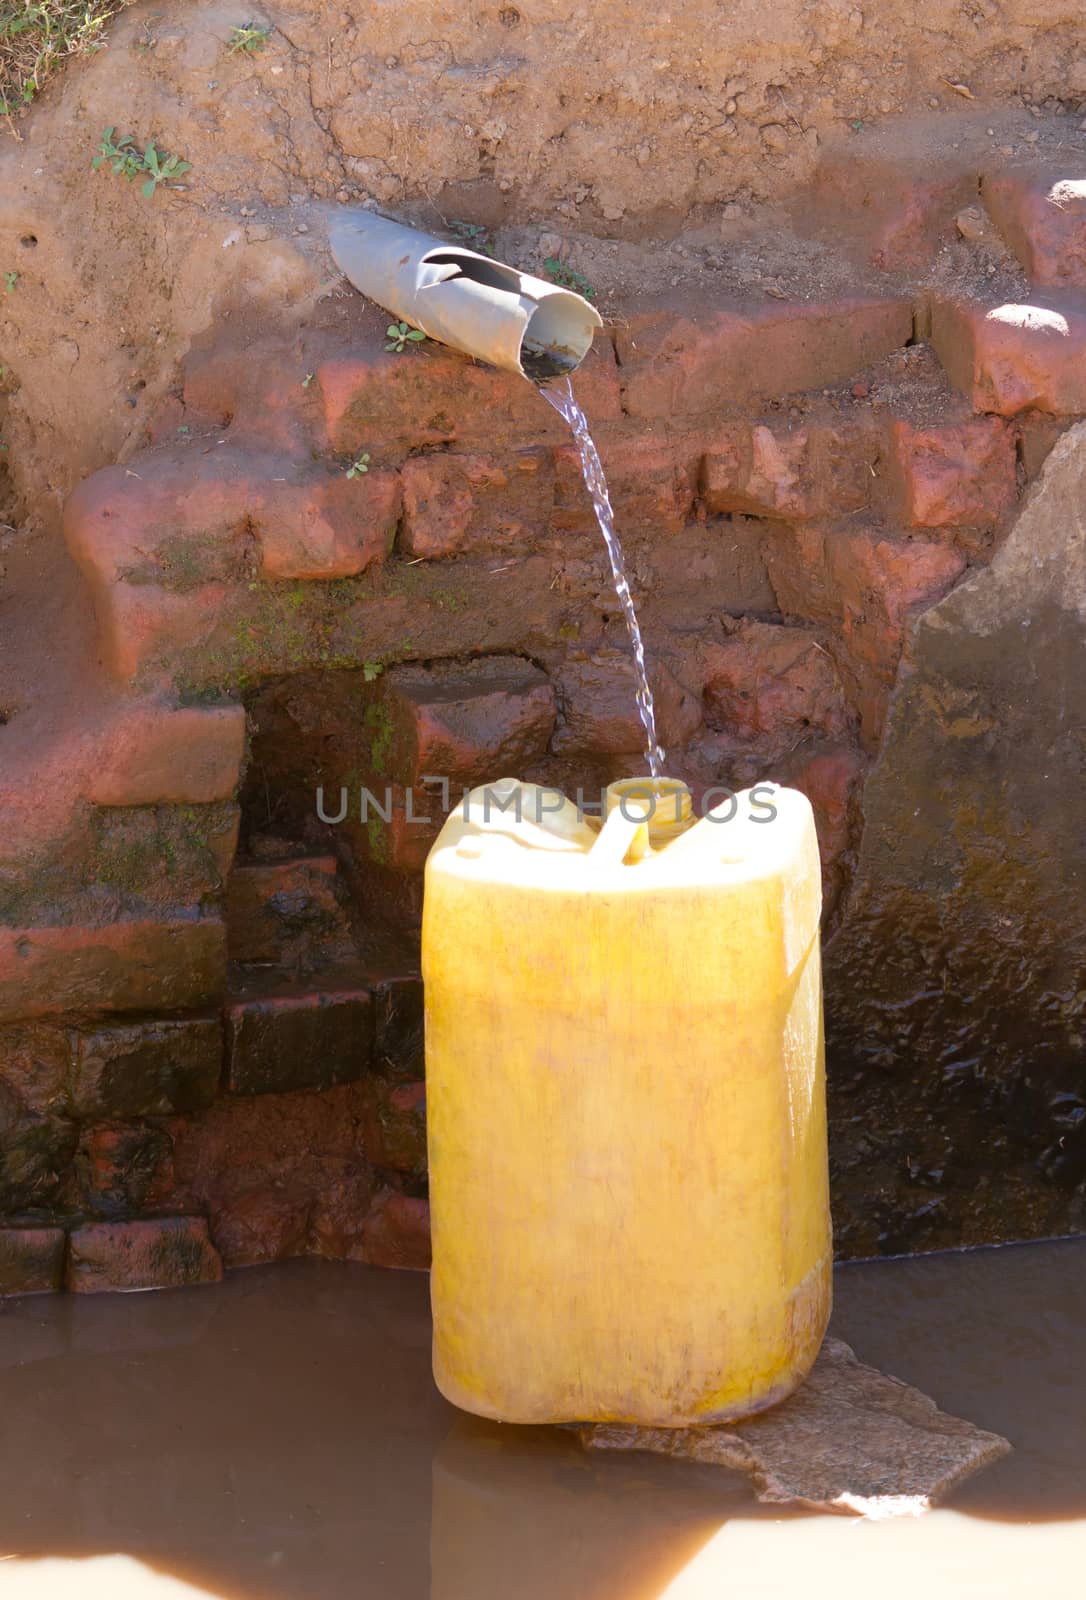 Water from a fresh water source, Madagascar